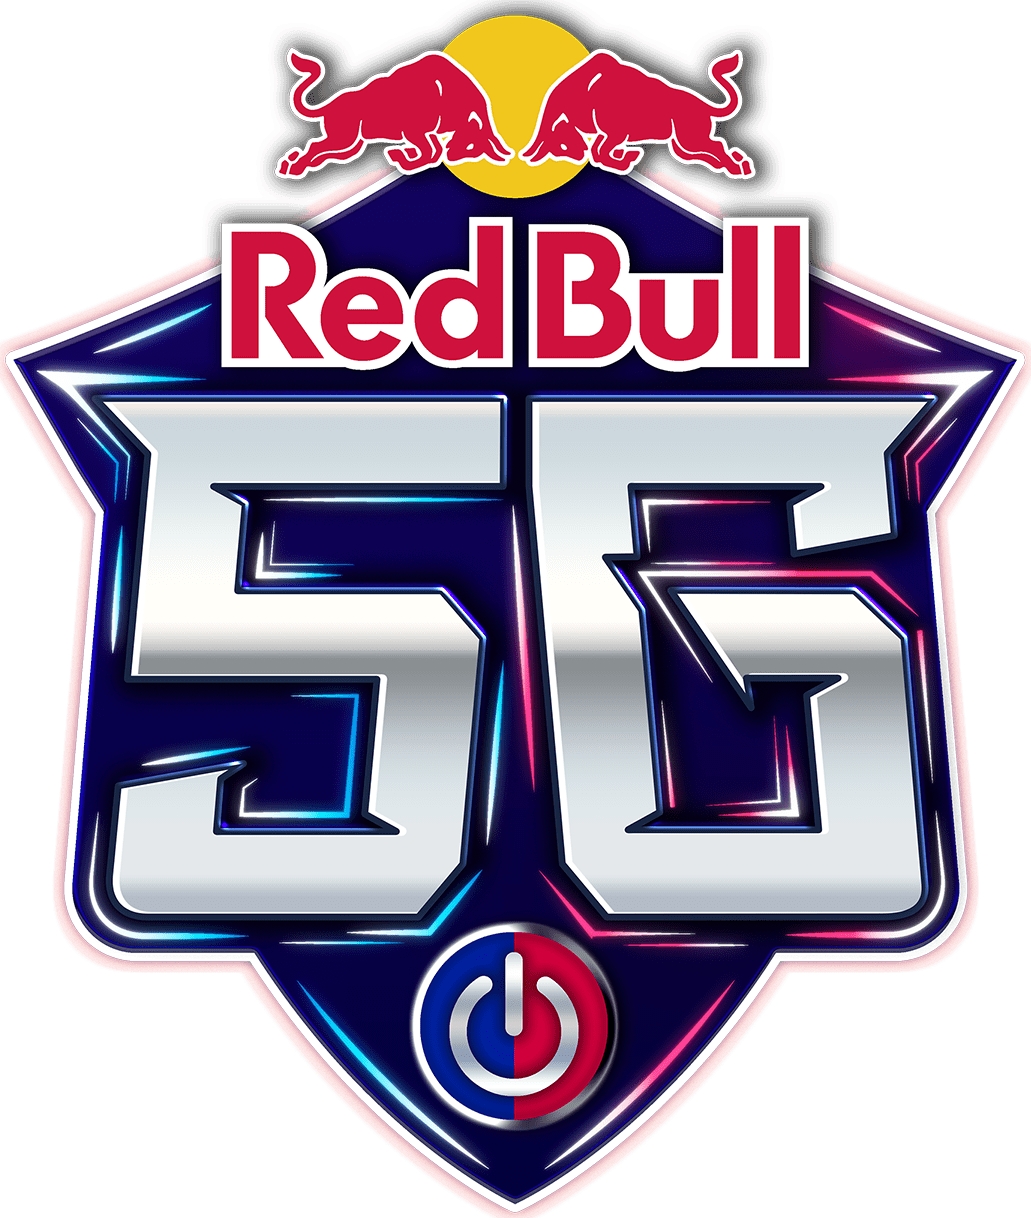 Red Bull 5g 21 東西対抗戦のゲームイベント